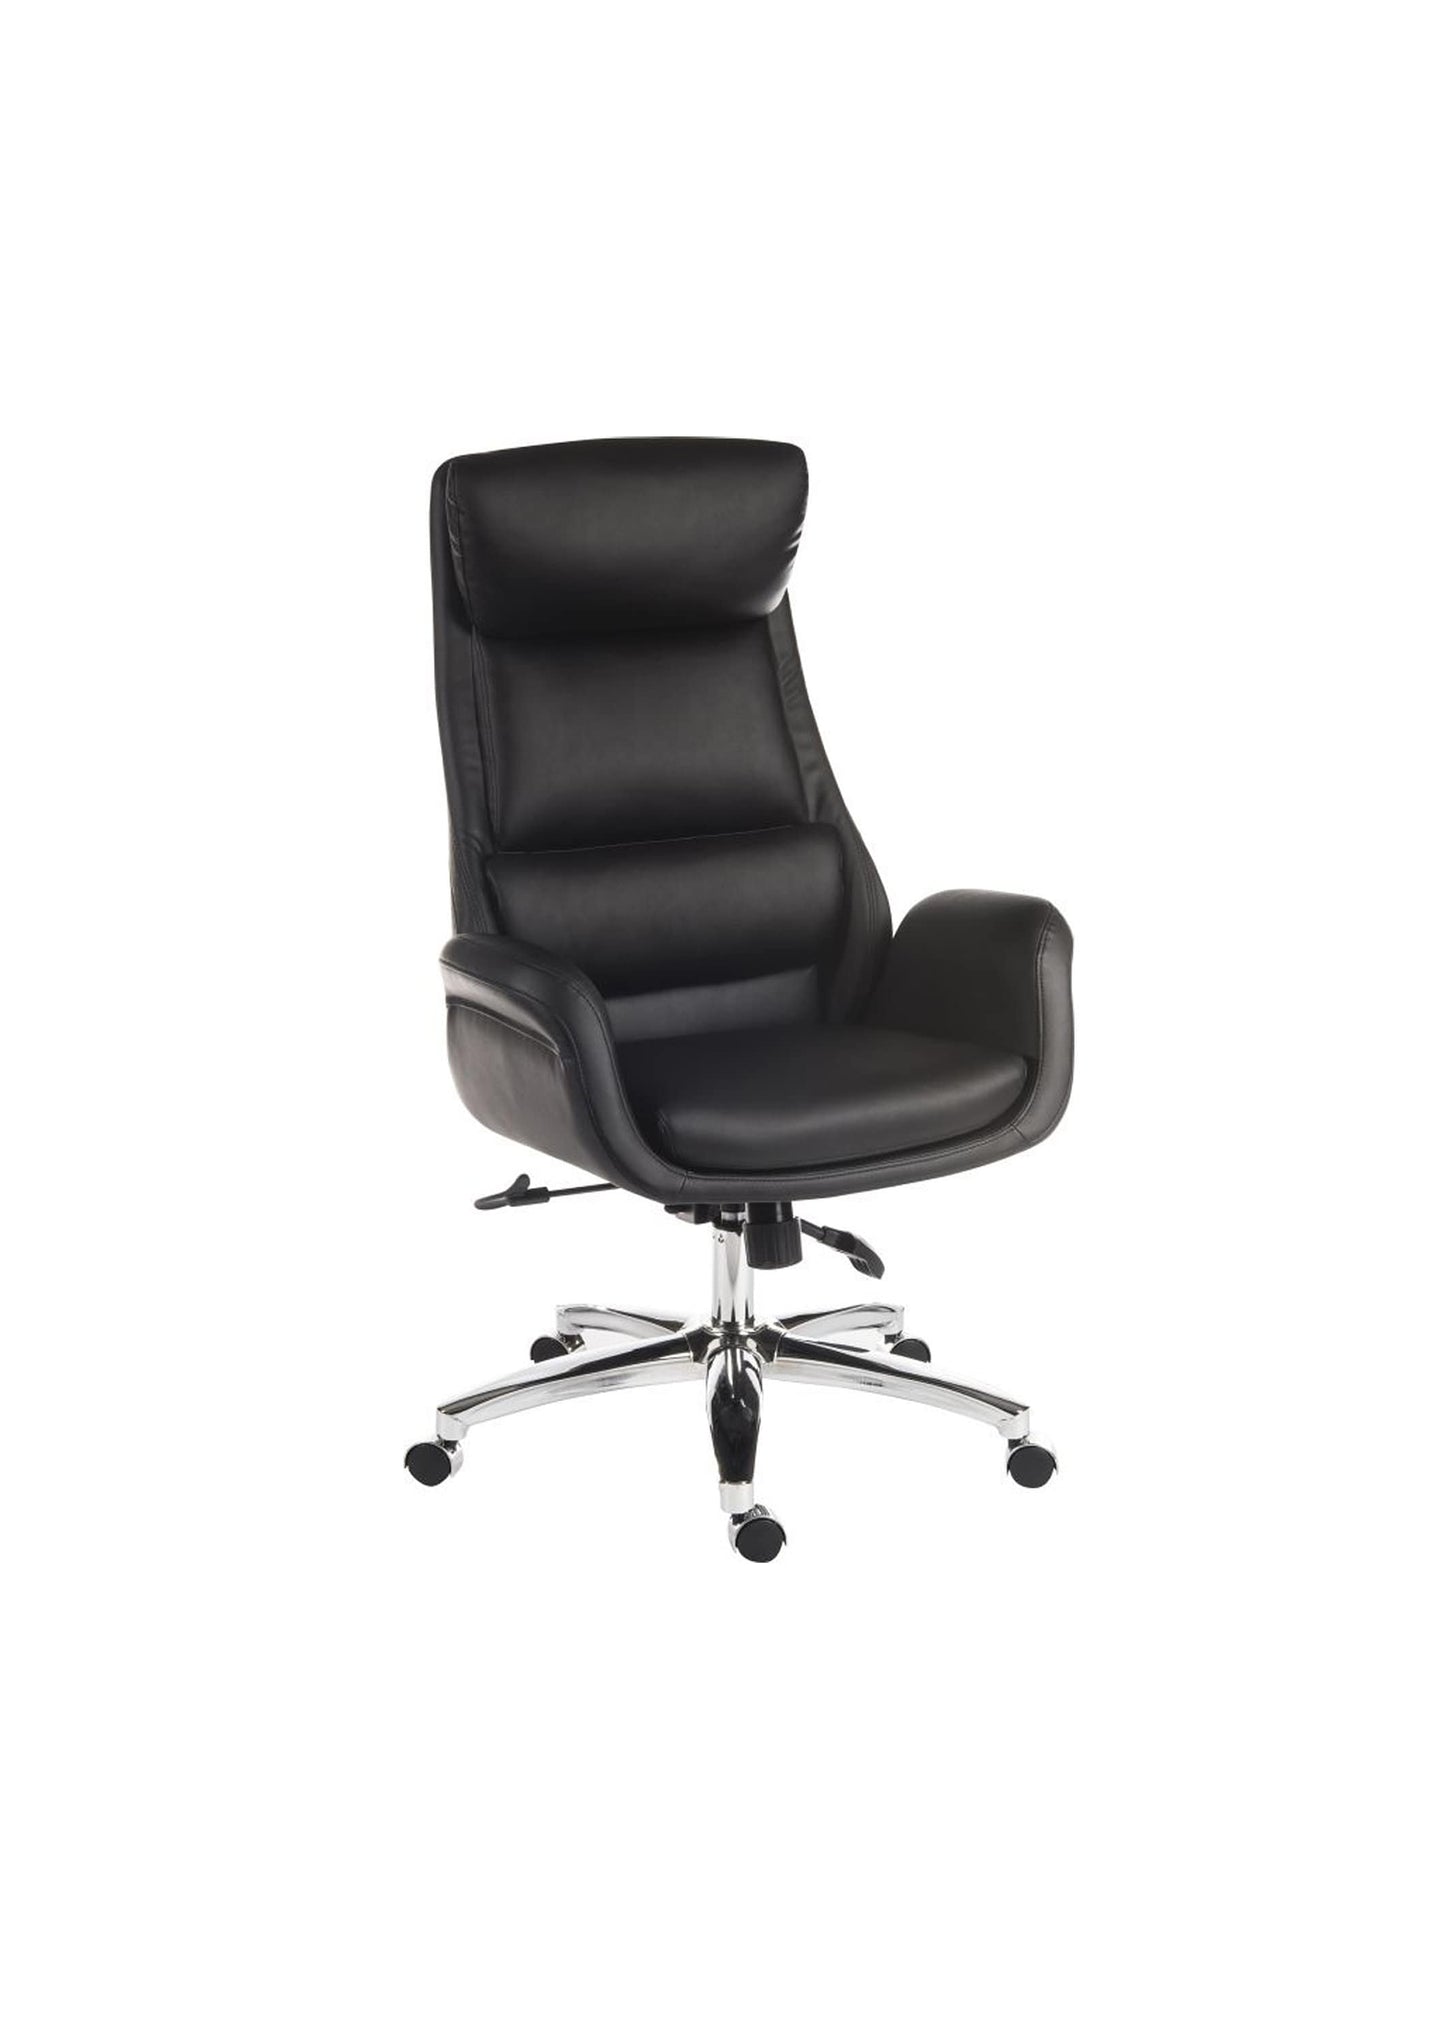 Luxury reclining executive chair in faux leather- highly padded